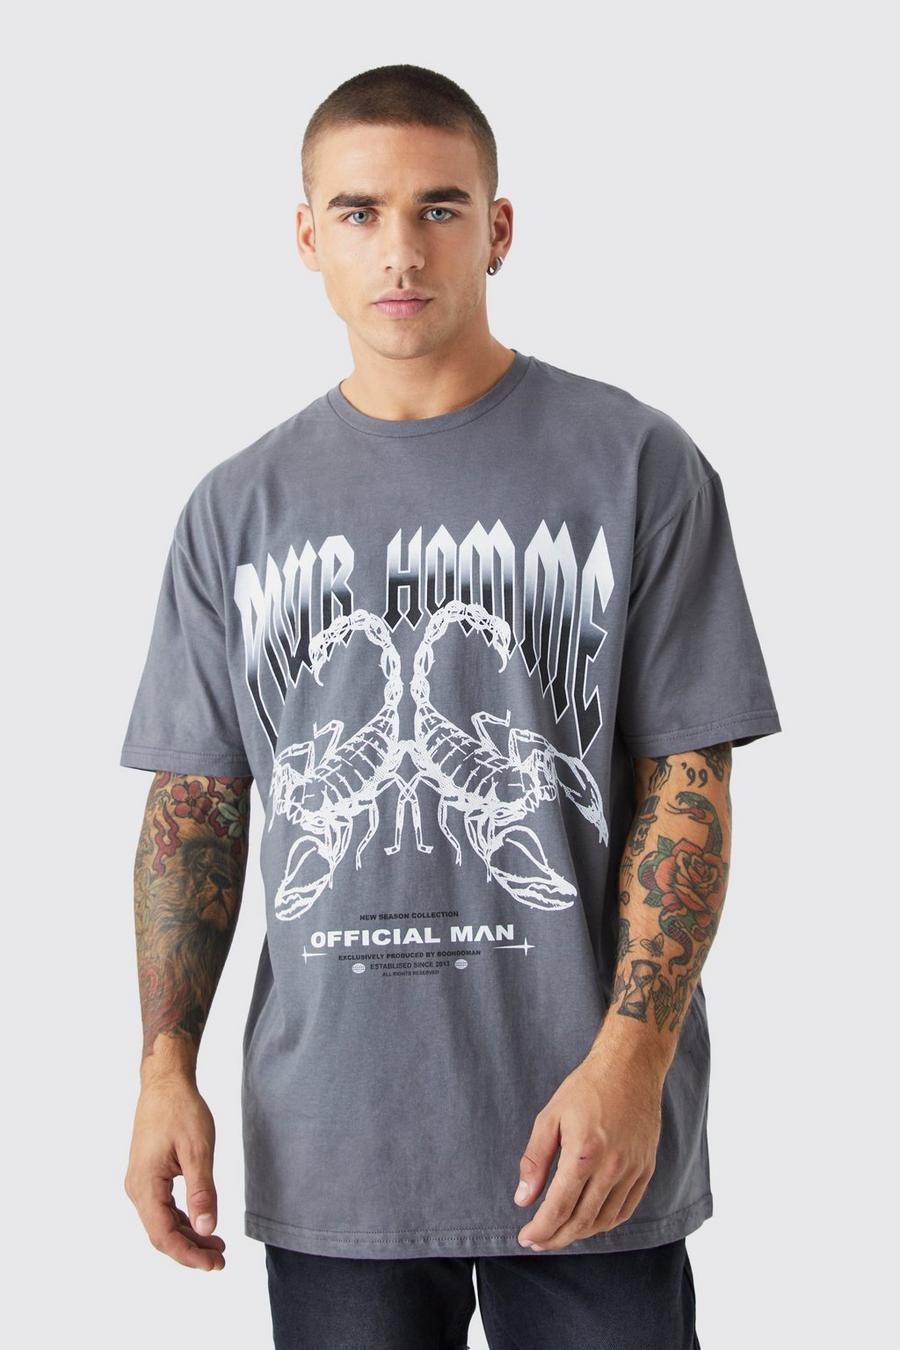 Charcoal grey Oversized Wash Homme Wash Graphic T-shirt